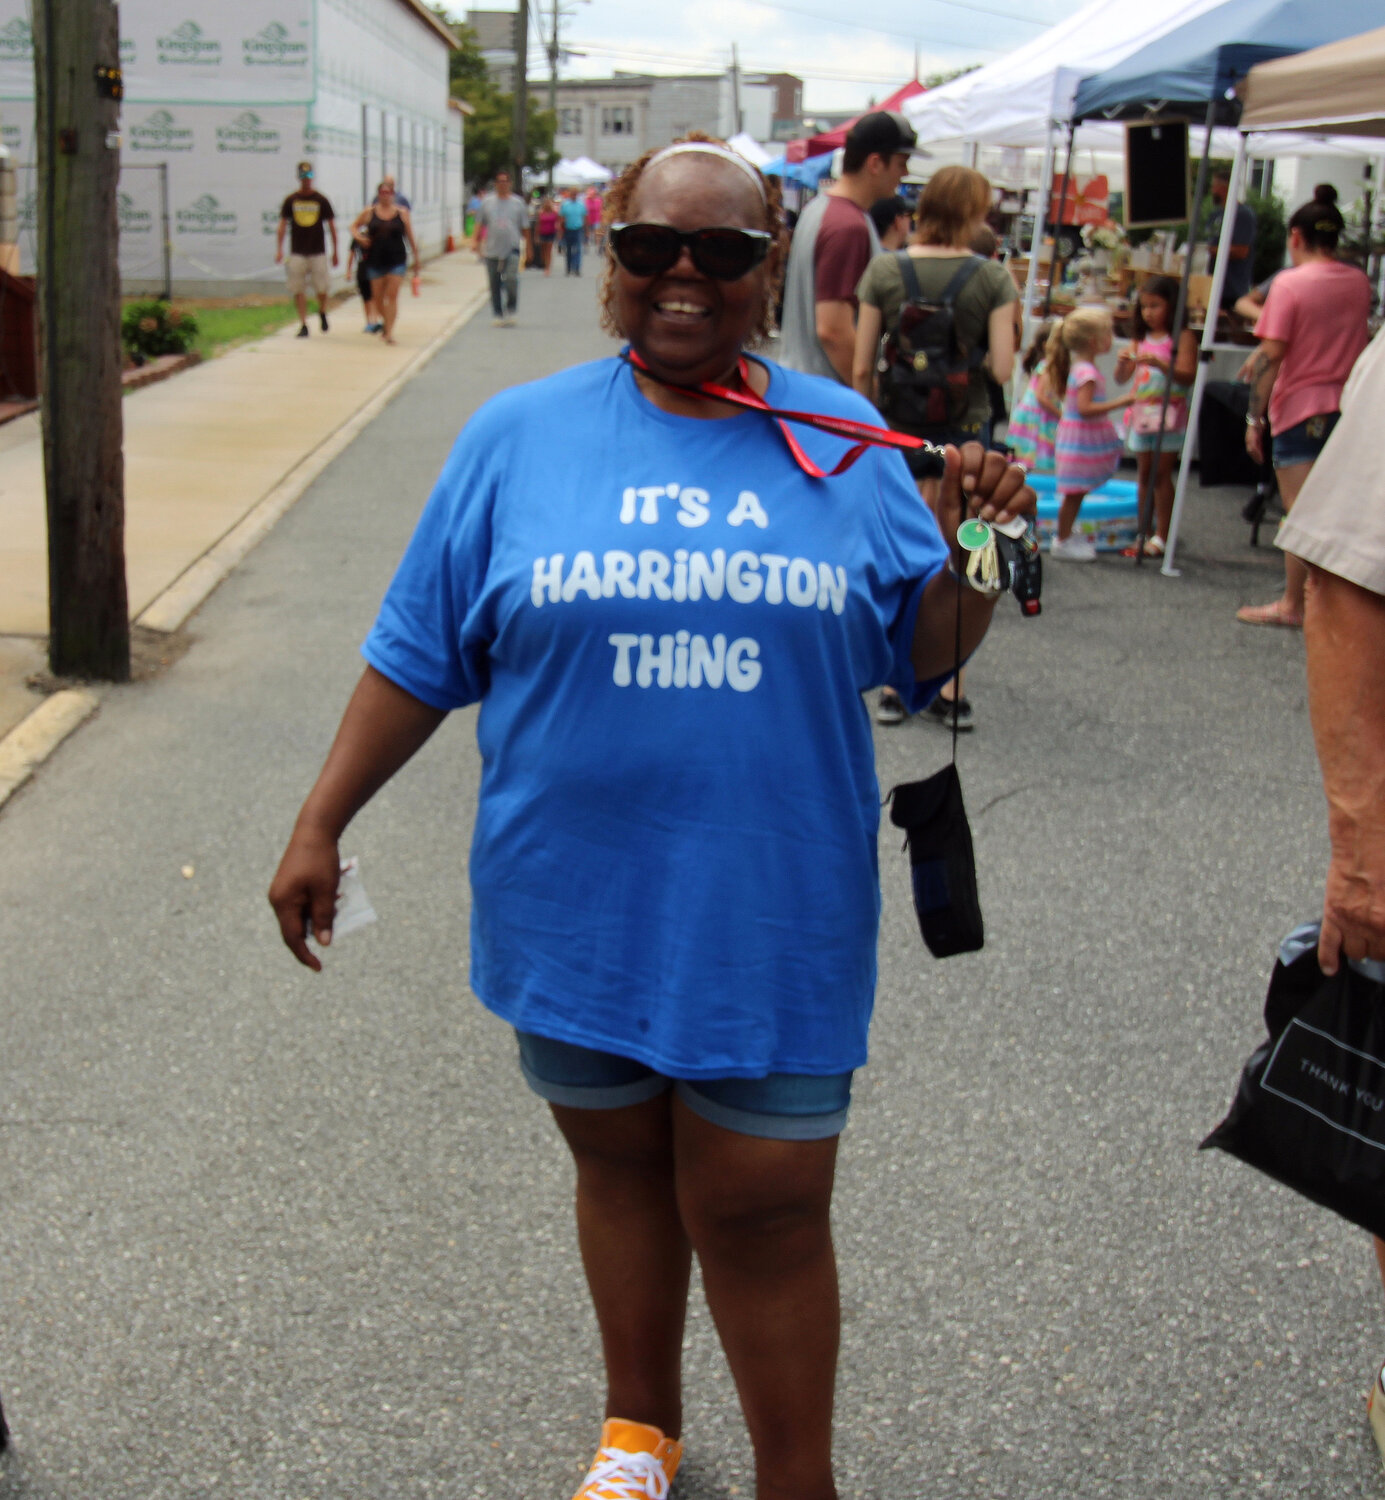 Trina Walker, of Harrington, showed her pride for her hometown with a shirt that read "It's a Harrington Thing" on Saturday during Harrington Heritage Day.